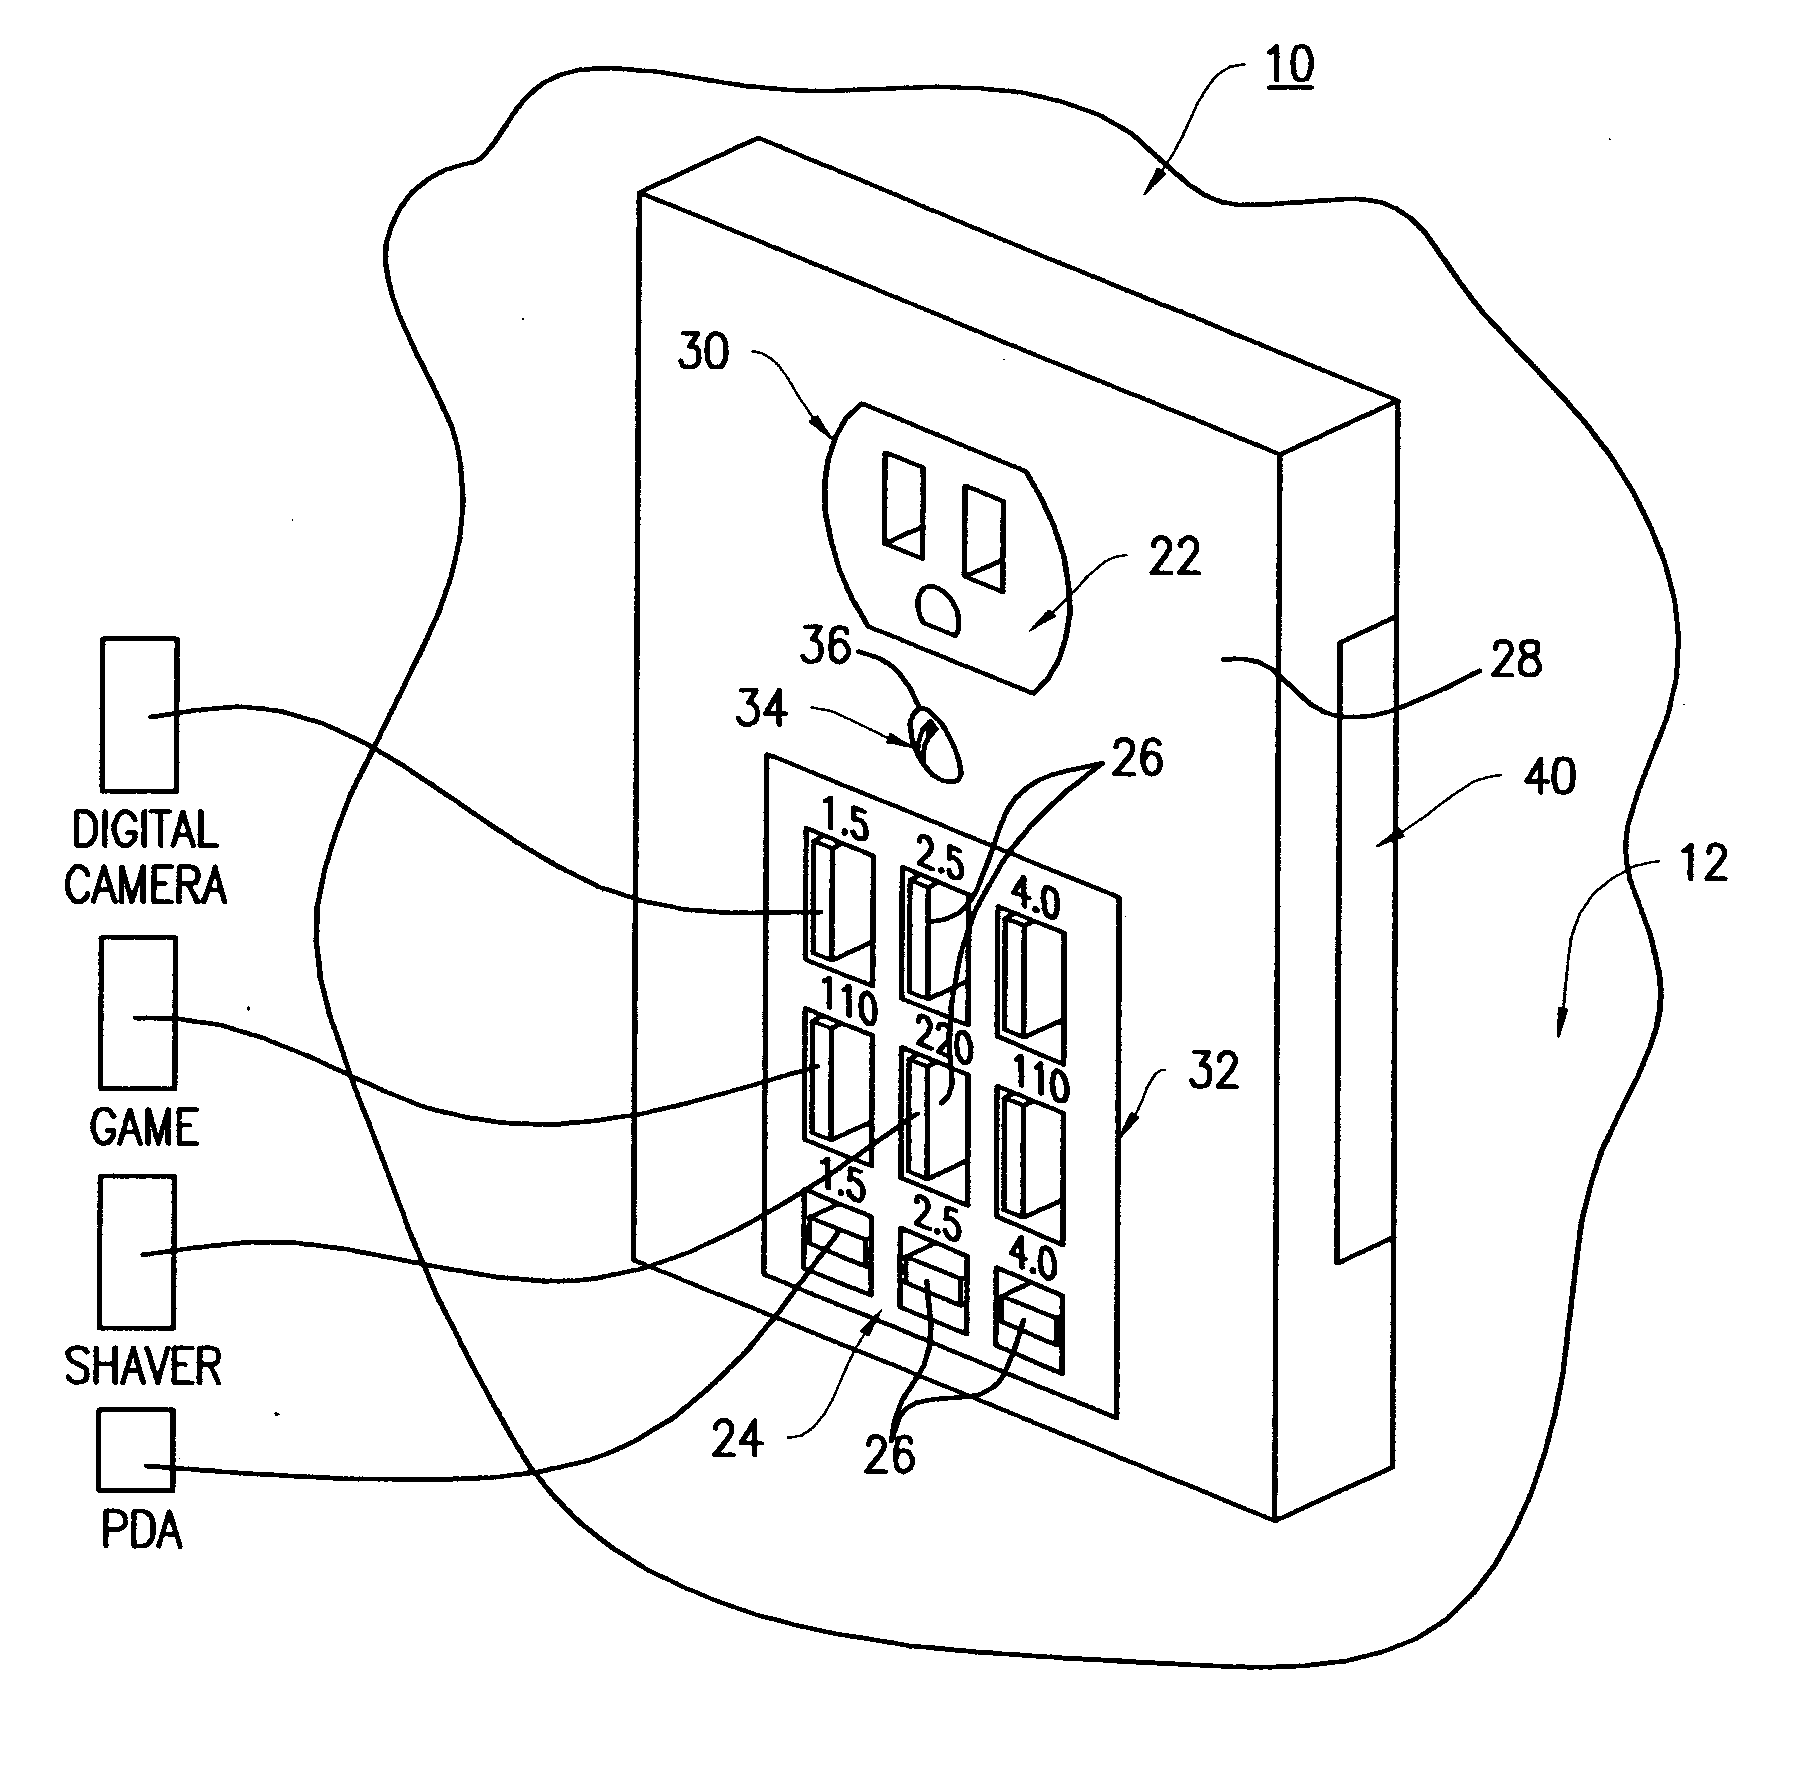 USB connector devices for charging